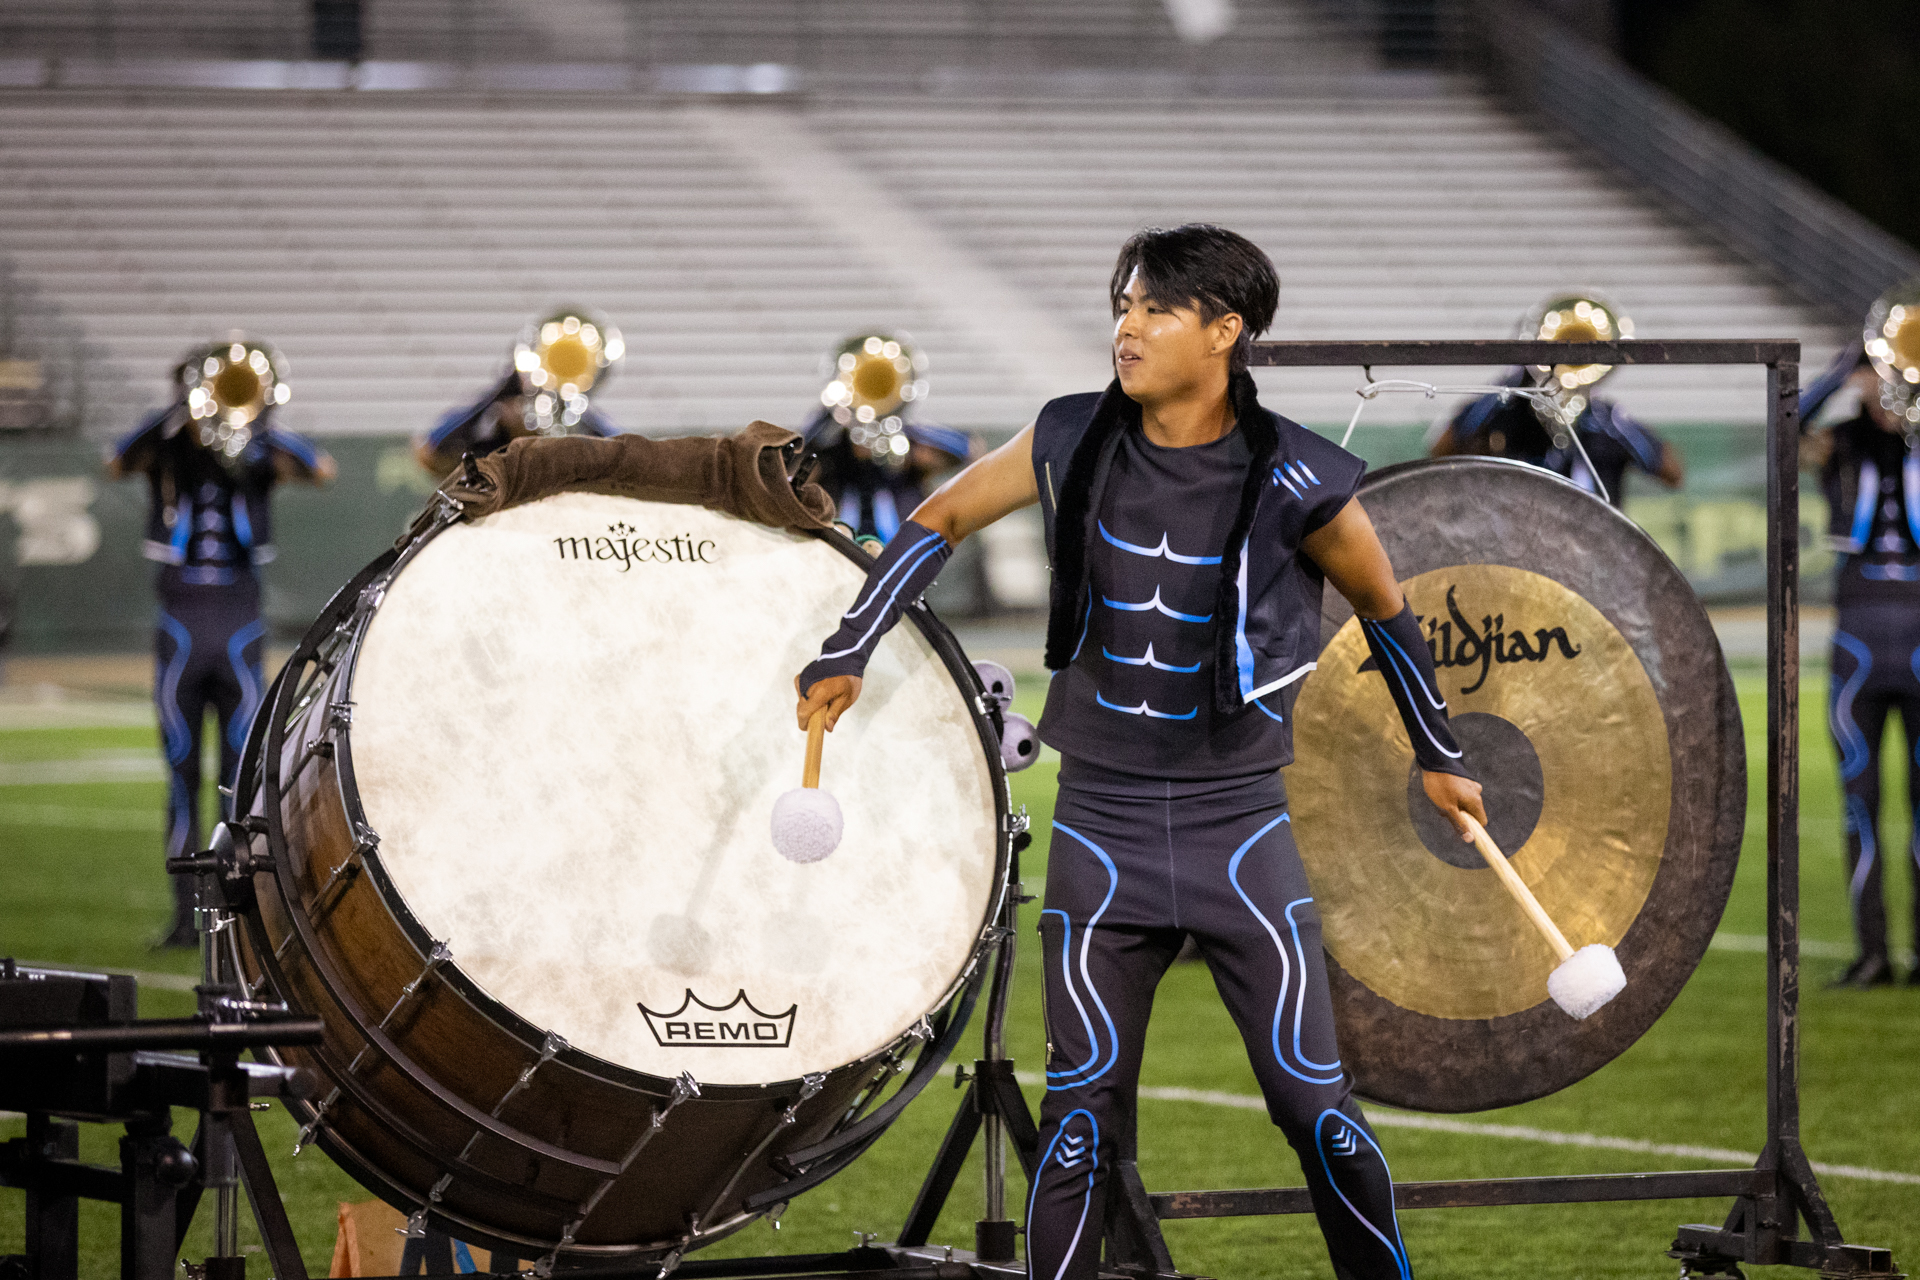 A Sacramento Mandarins drummer dressed in a blue attire performs with a large drum and cymbal on the field at Hornet Stadium.